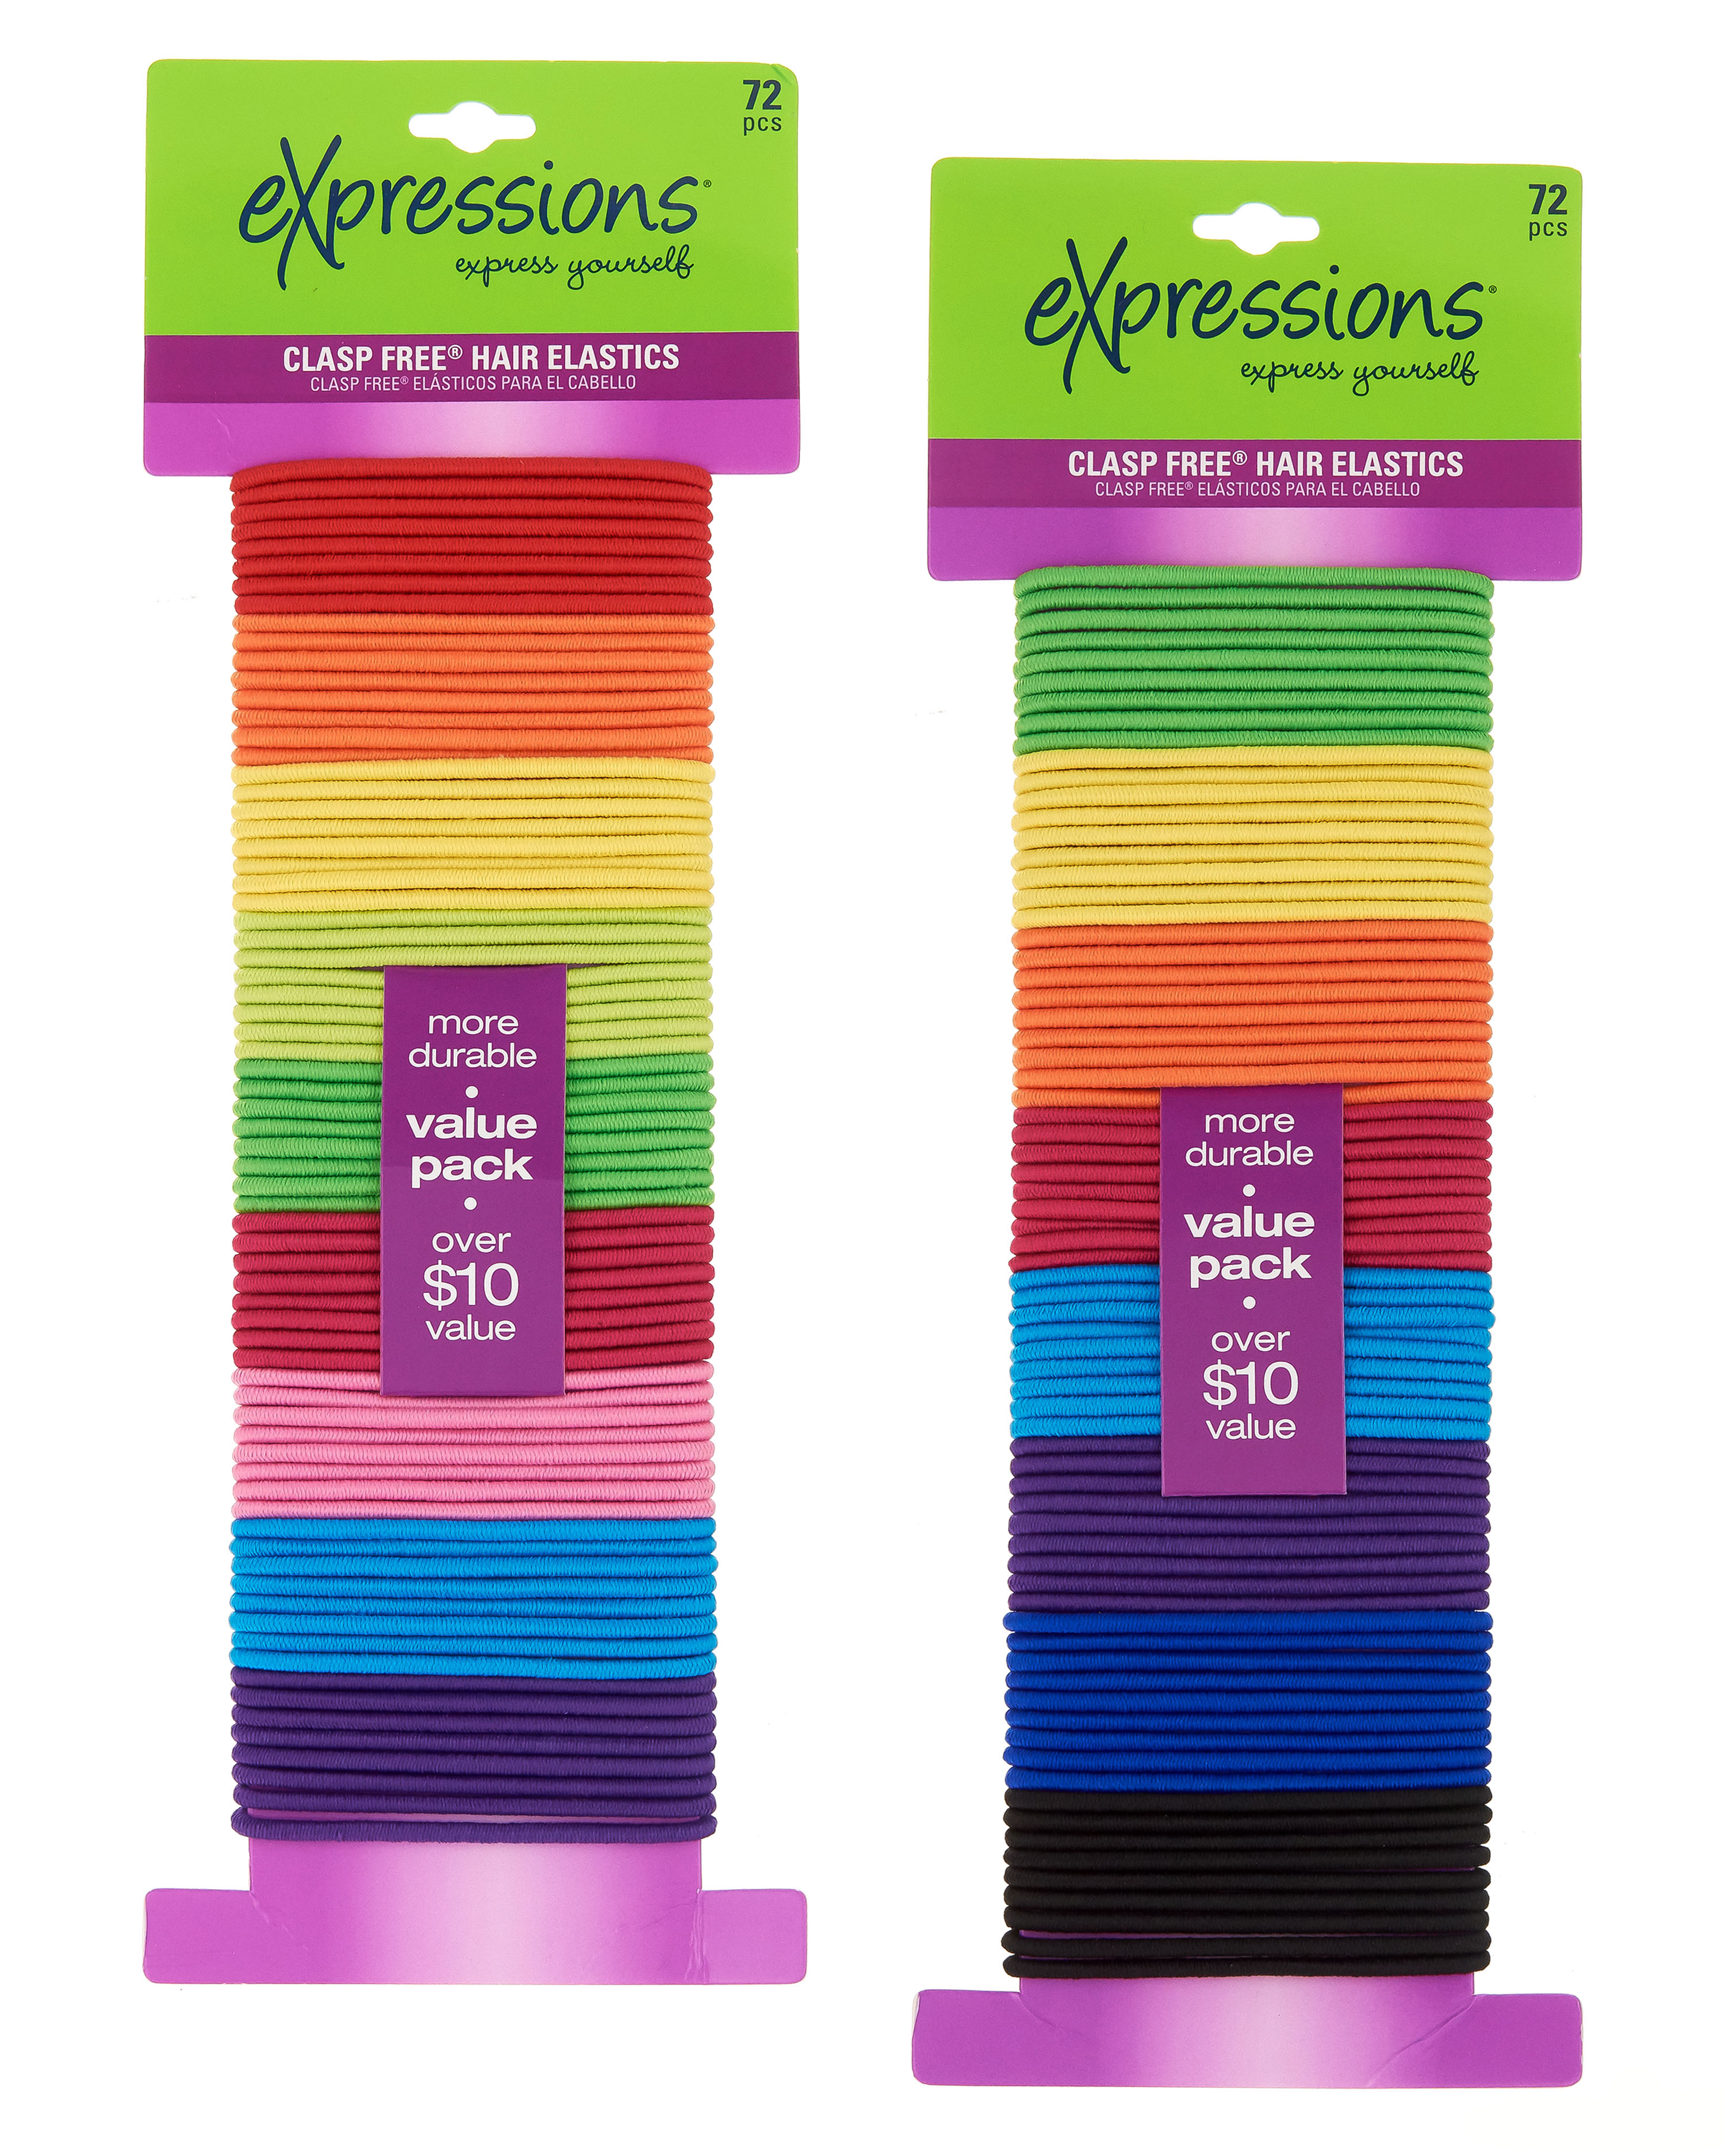 ''This VALUE set includes 72 hair elastics in bright colors. These are designed to be 20X more durabl